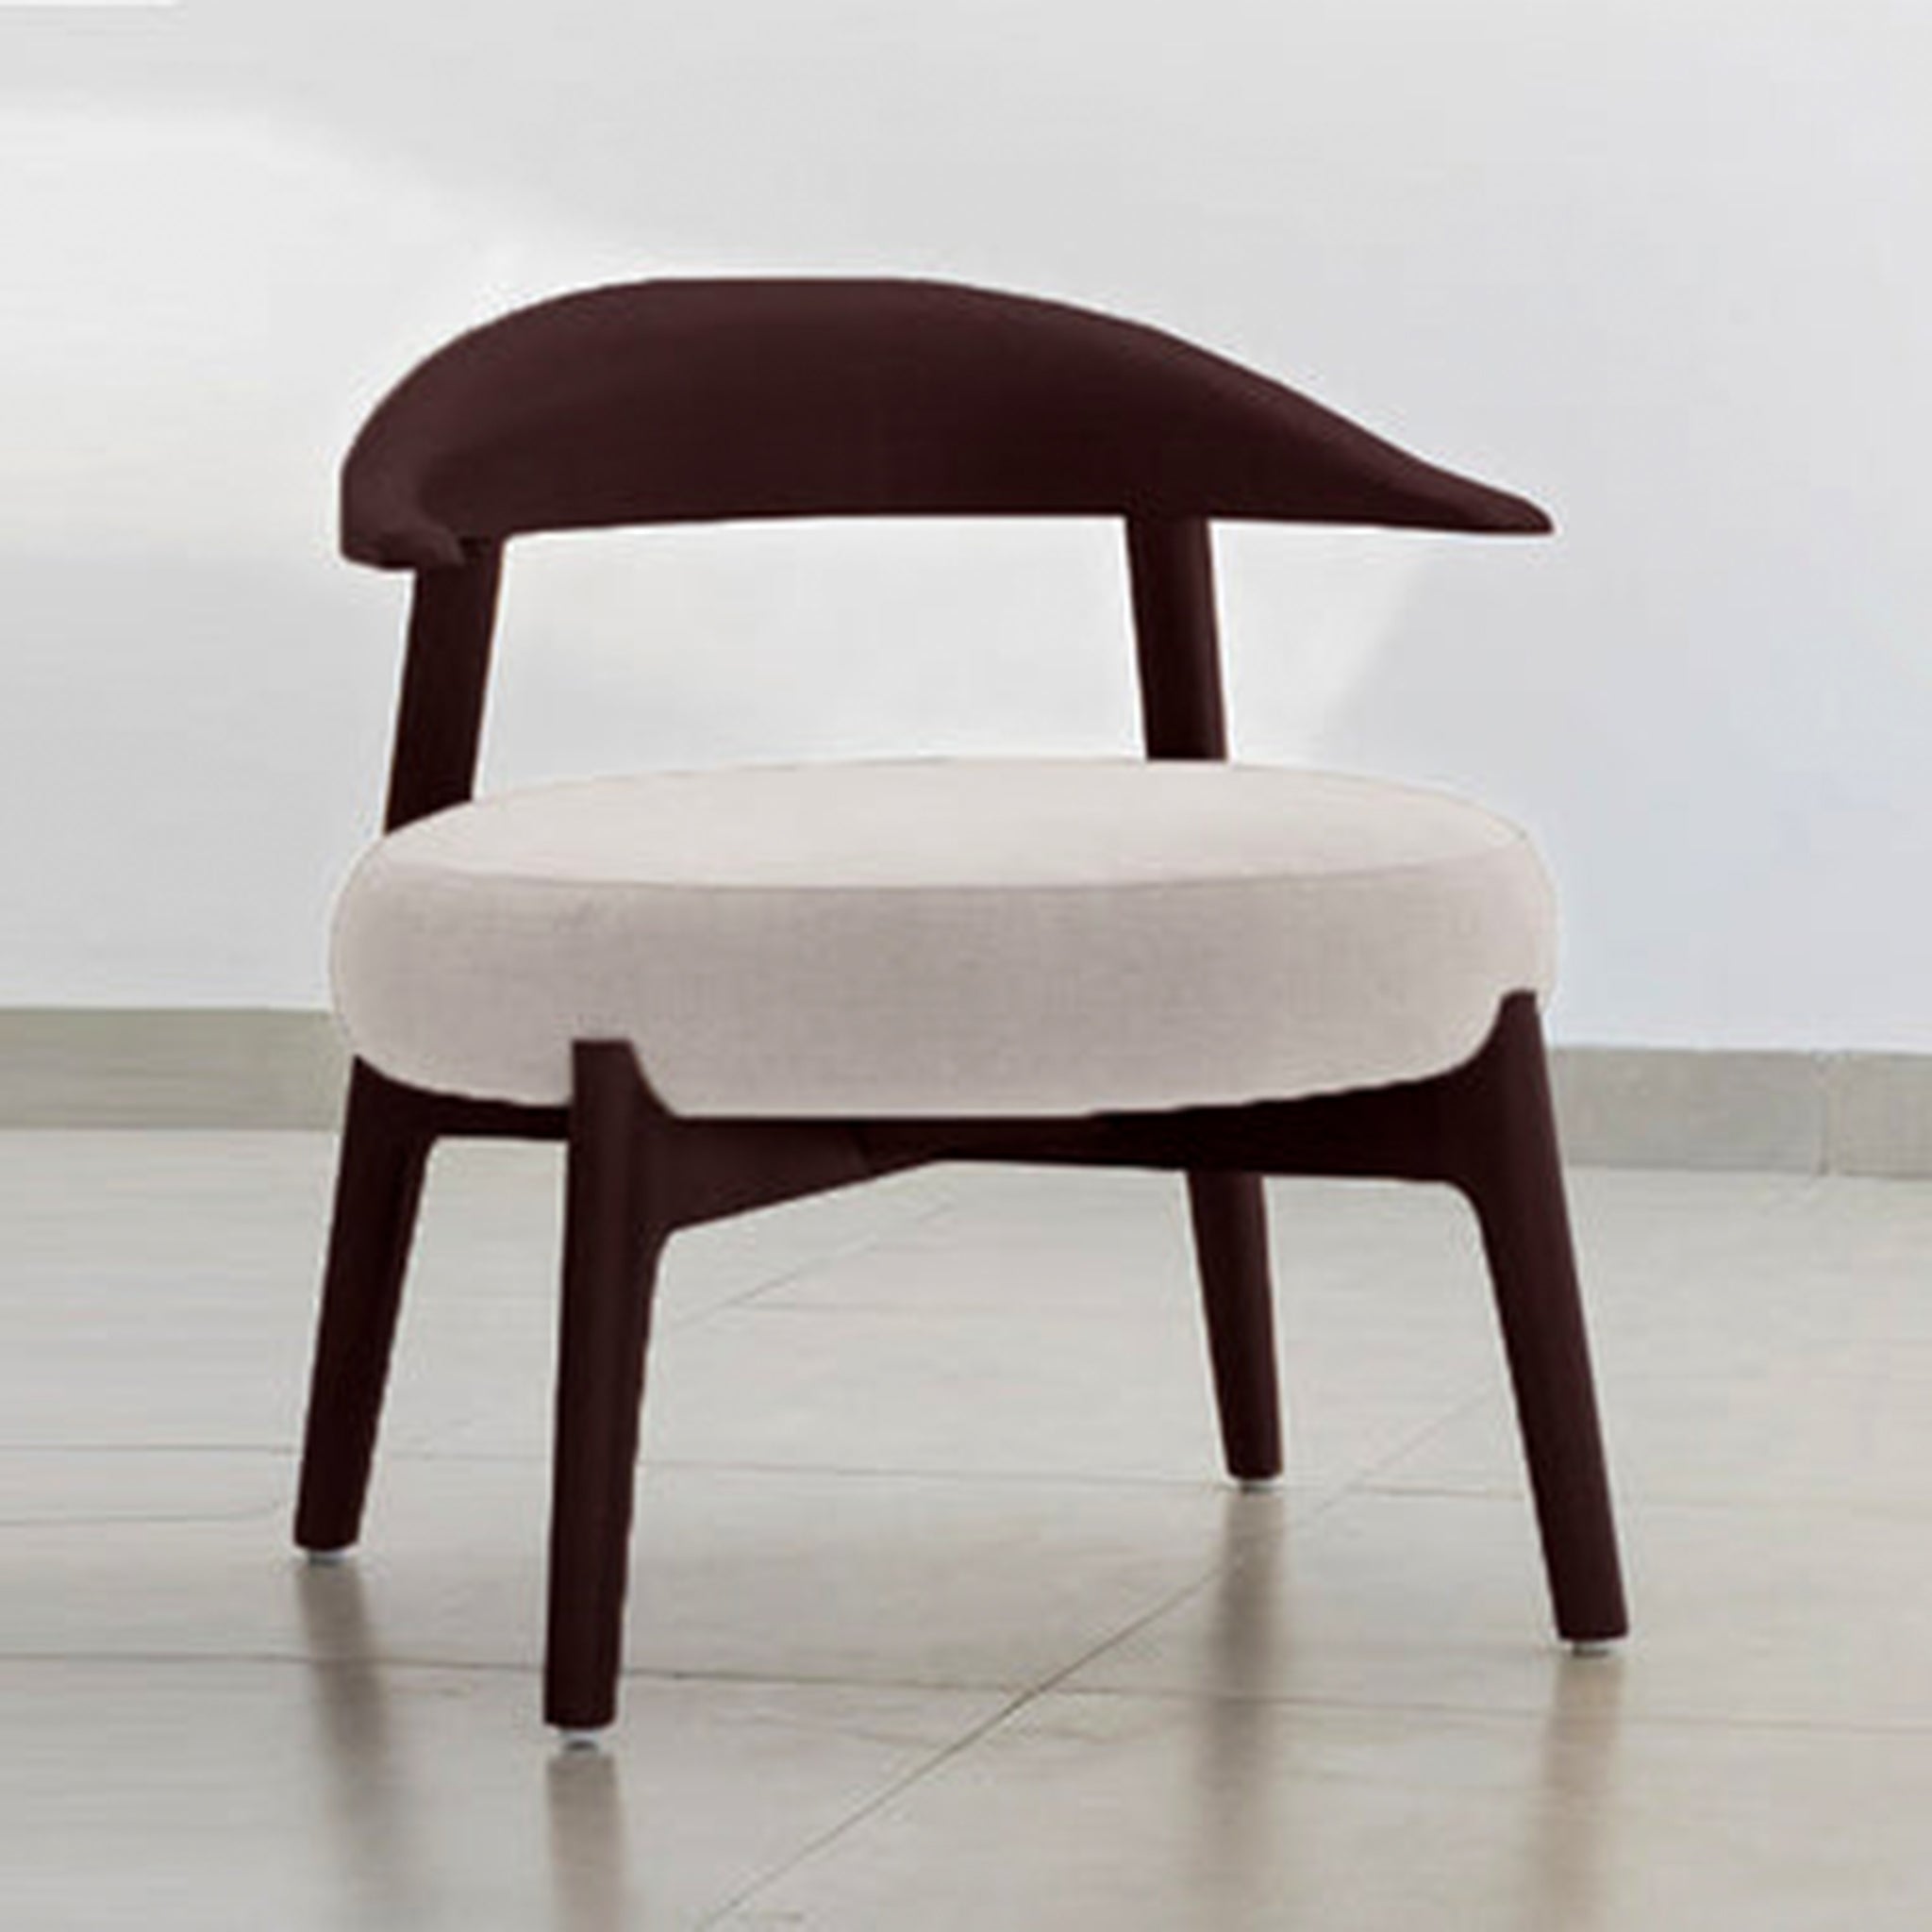 "The Hyde Accent Chair with unique wooden design and comfortable seating"